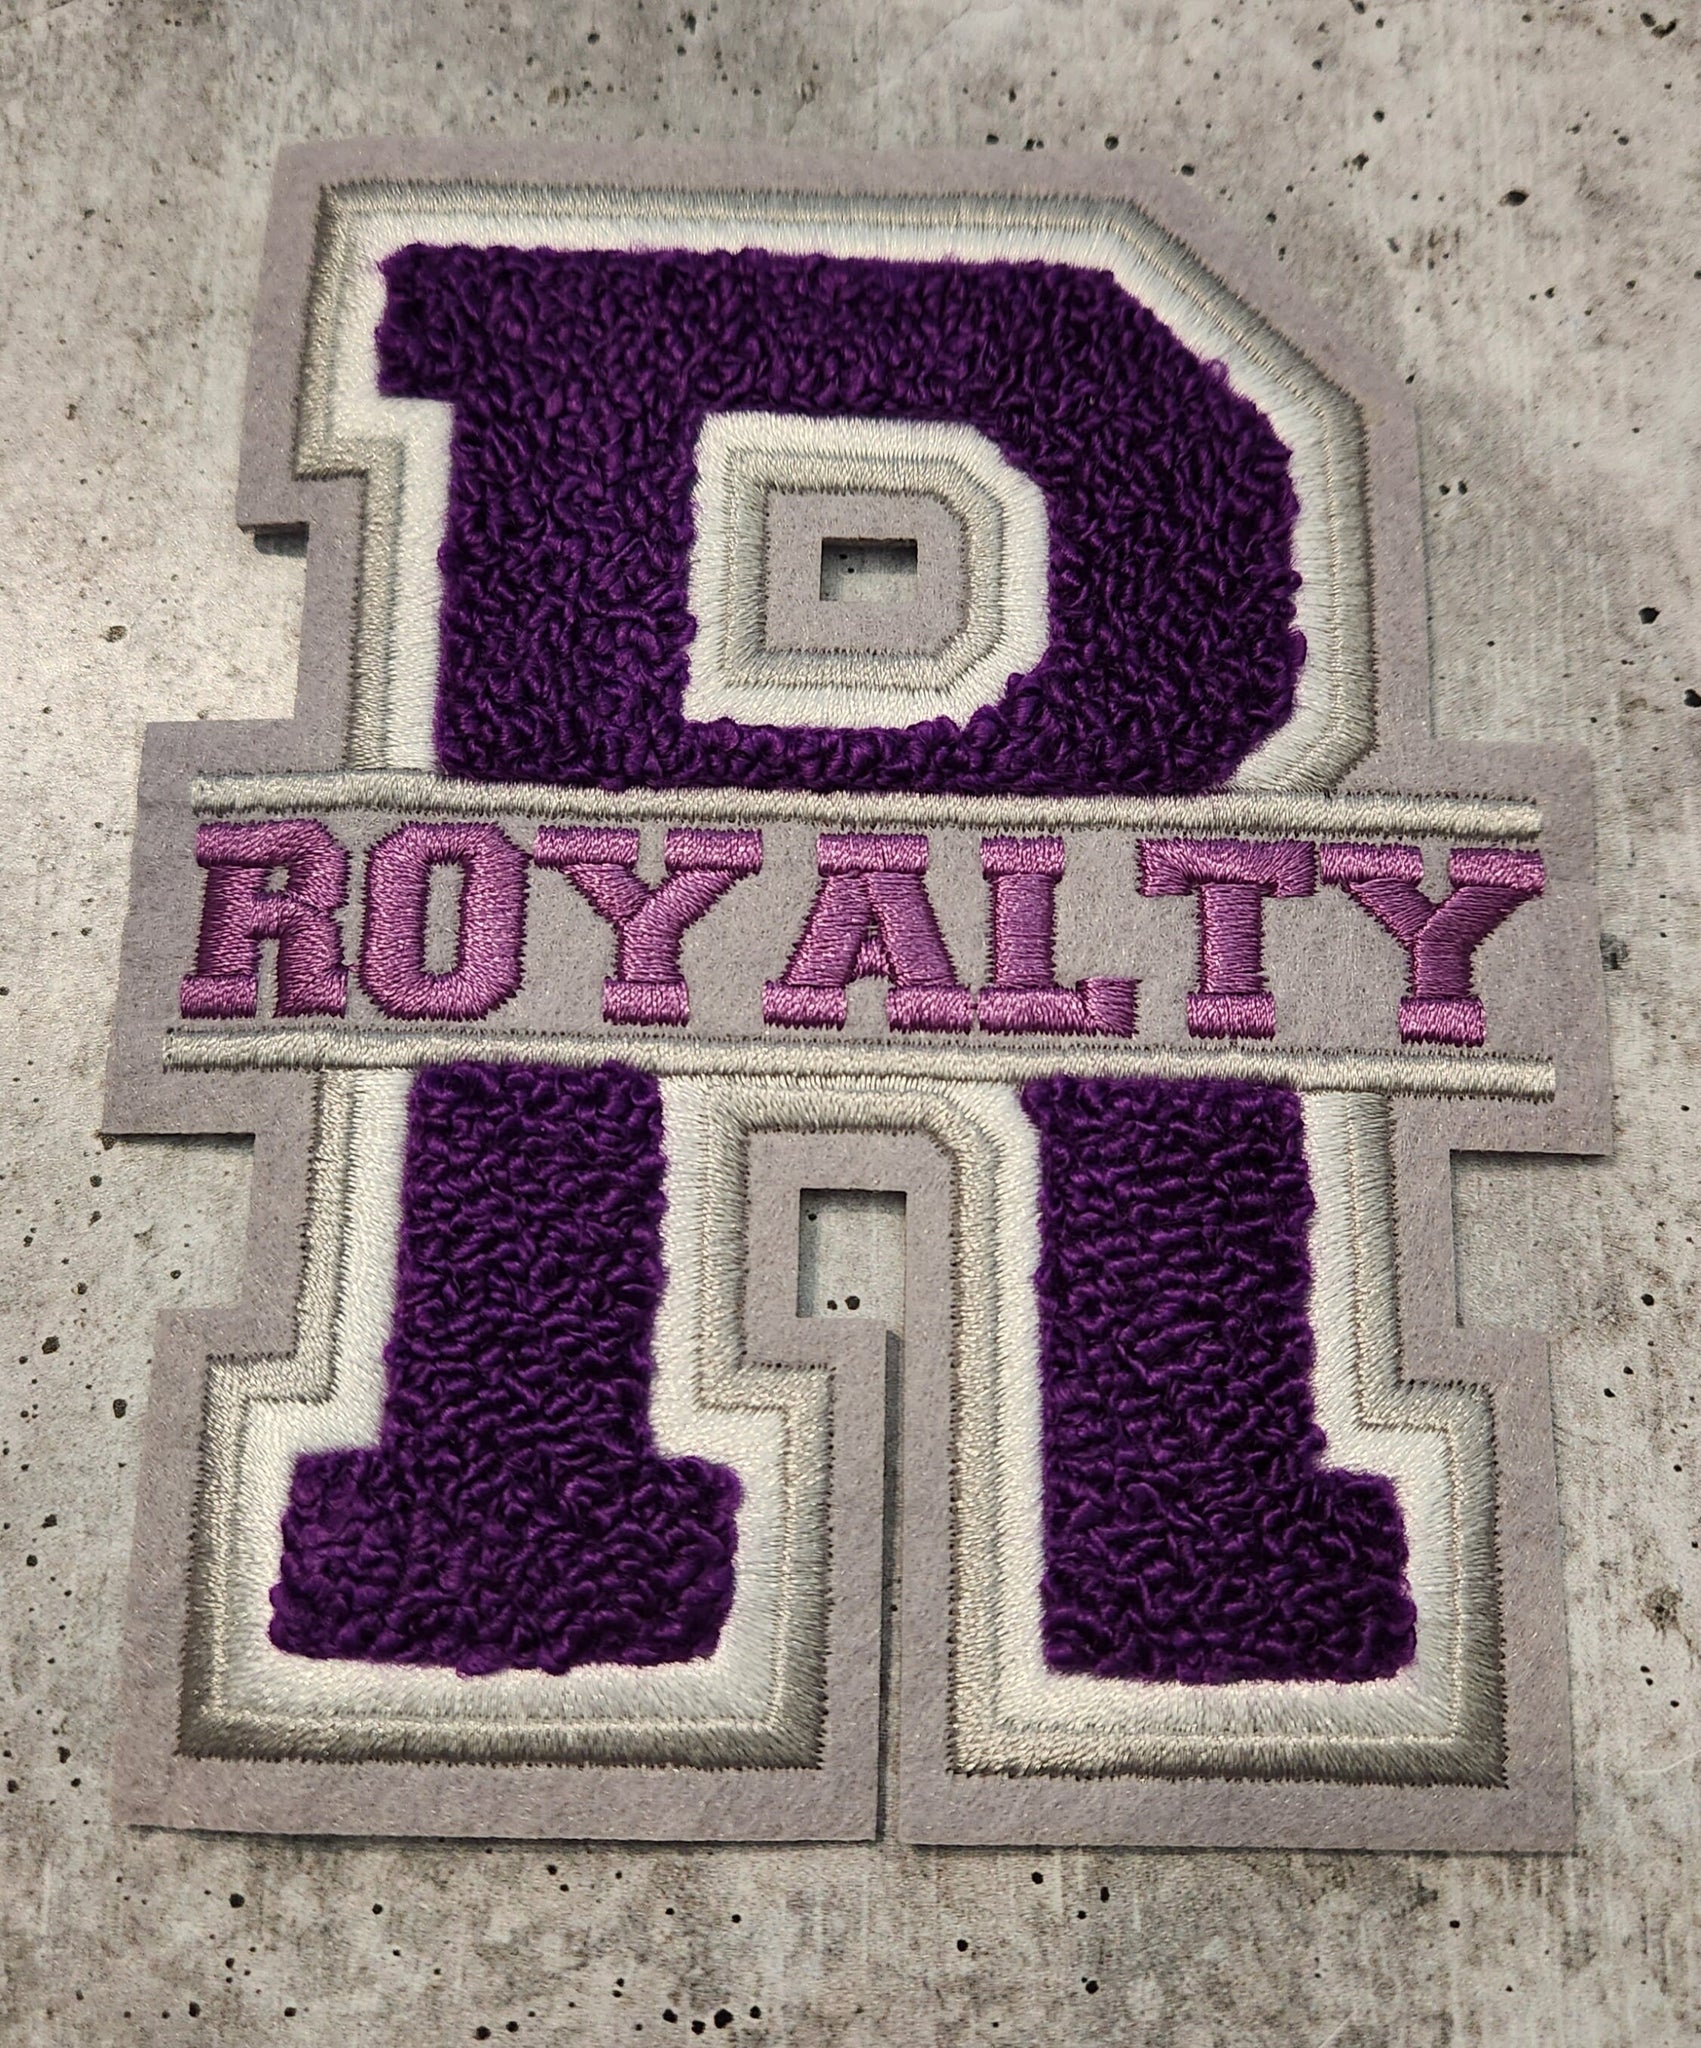 New, Monogram Letter, "R" Royalty, Chenille Iron-on Patch, Size 6",Purple|Silver|White, Patch for Jackets and More